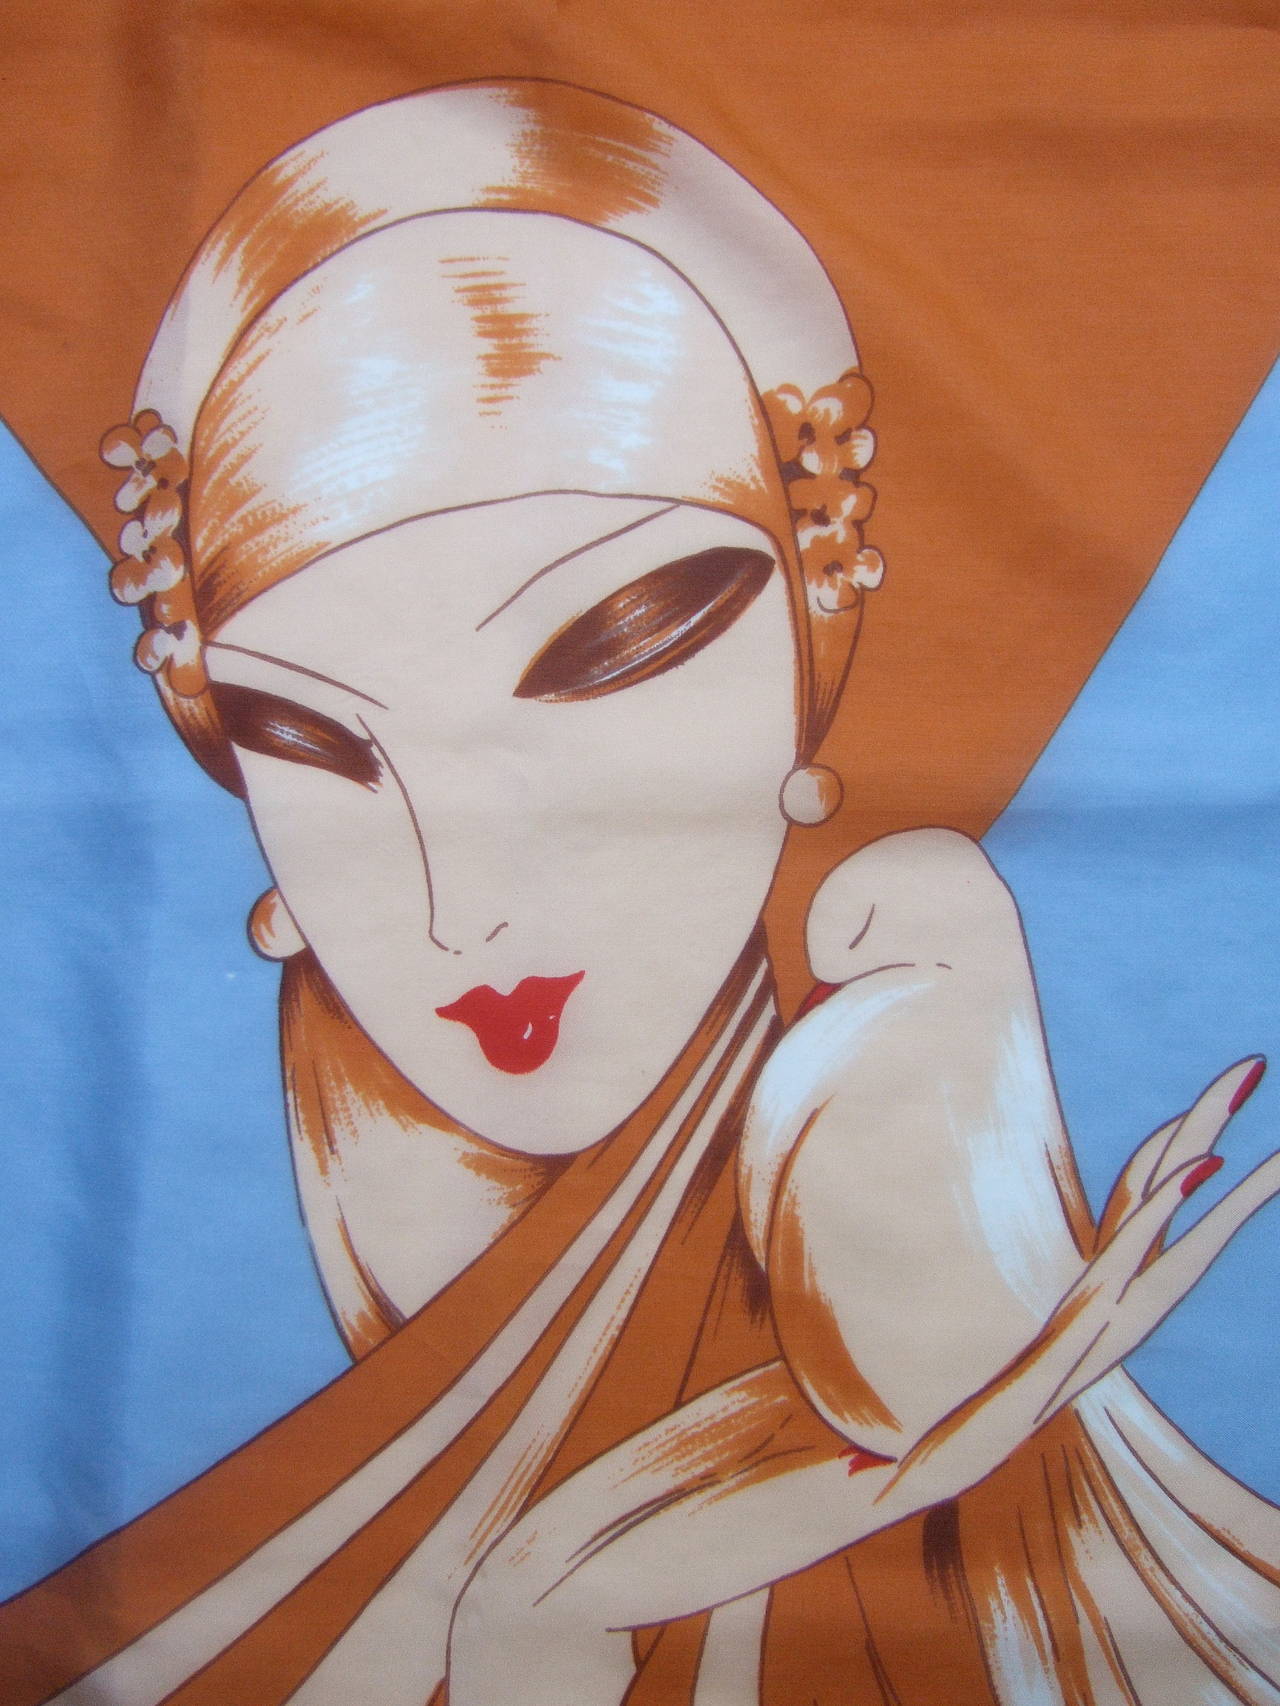 Pierre Cardin Art Deco inspired stylized woman silk scarf c 1970s
The vintage Italian silk scarf is illustrated with an elegant woman
holding a dove

The copper brown colors illuminate against the ice blue
silk background. The hand rolled scarf